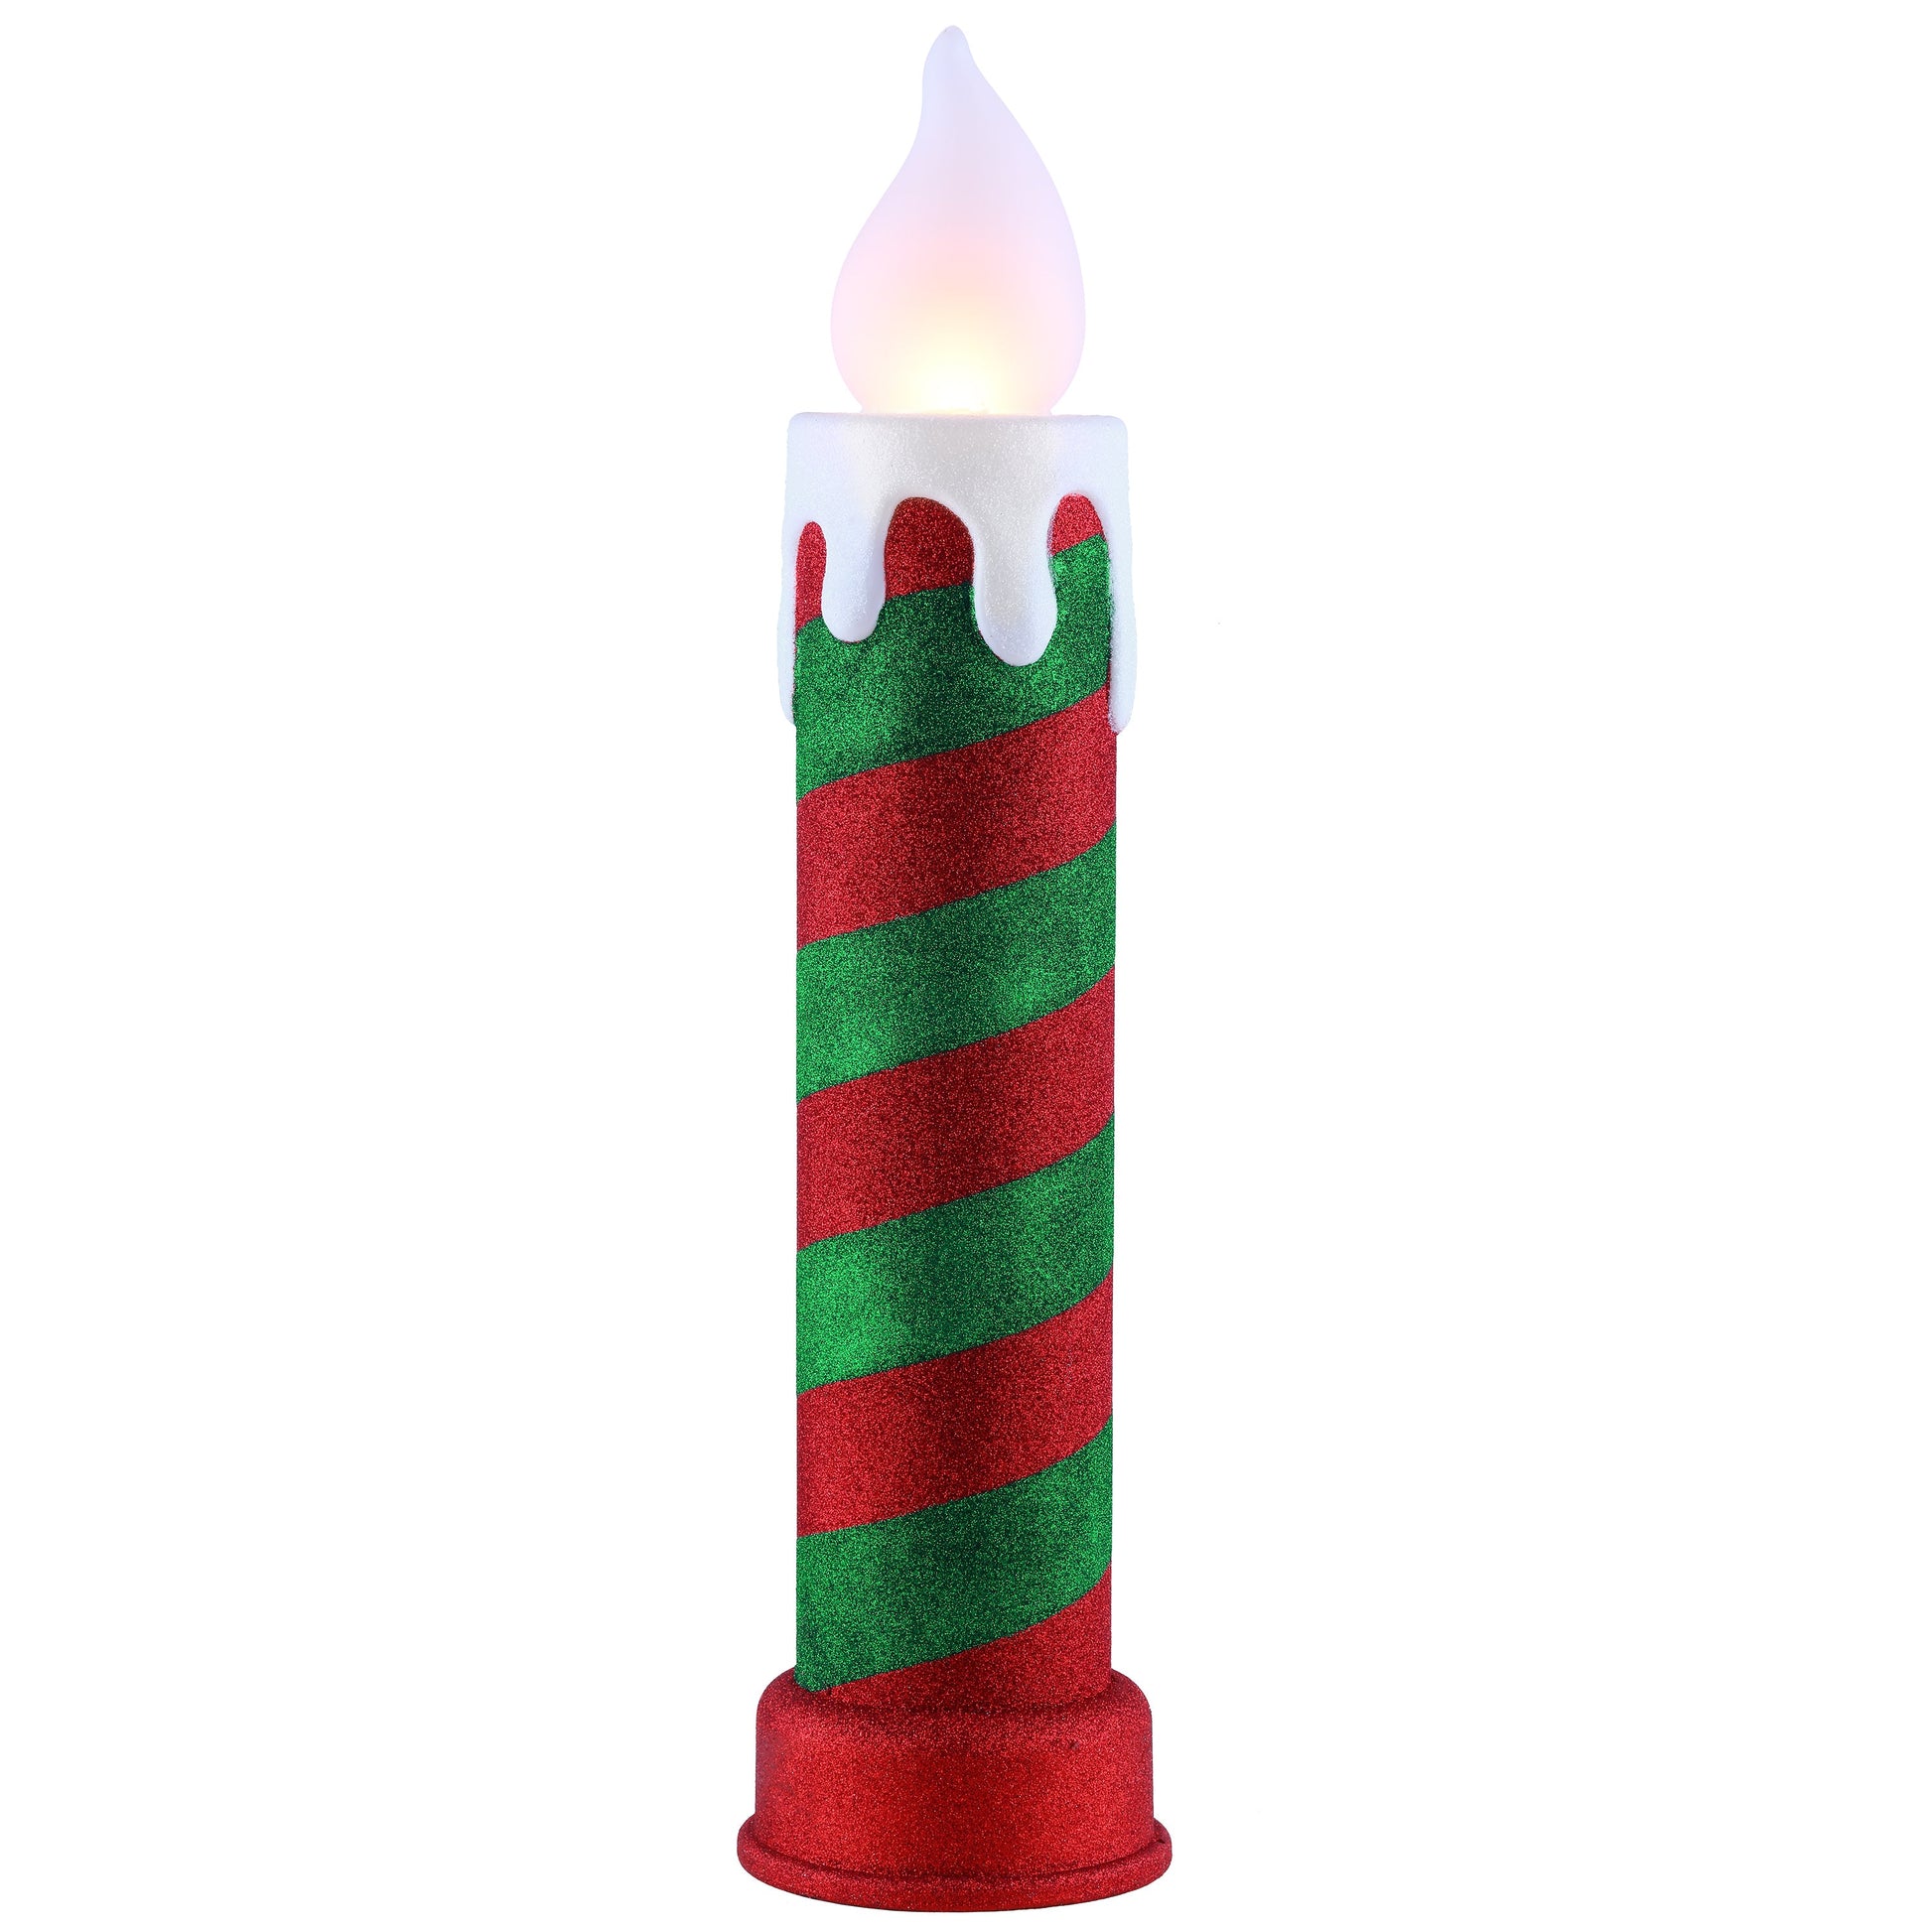 24" Glittery Blow Mold Candle - Red & Green - Mr. Christmas